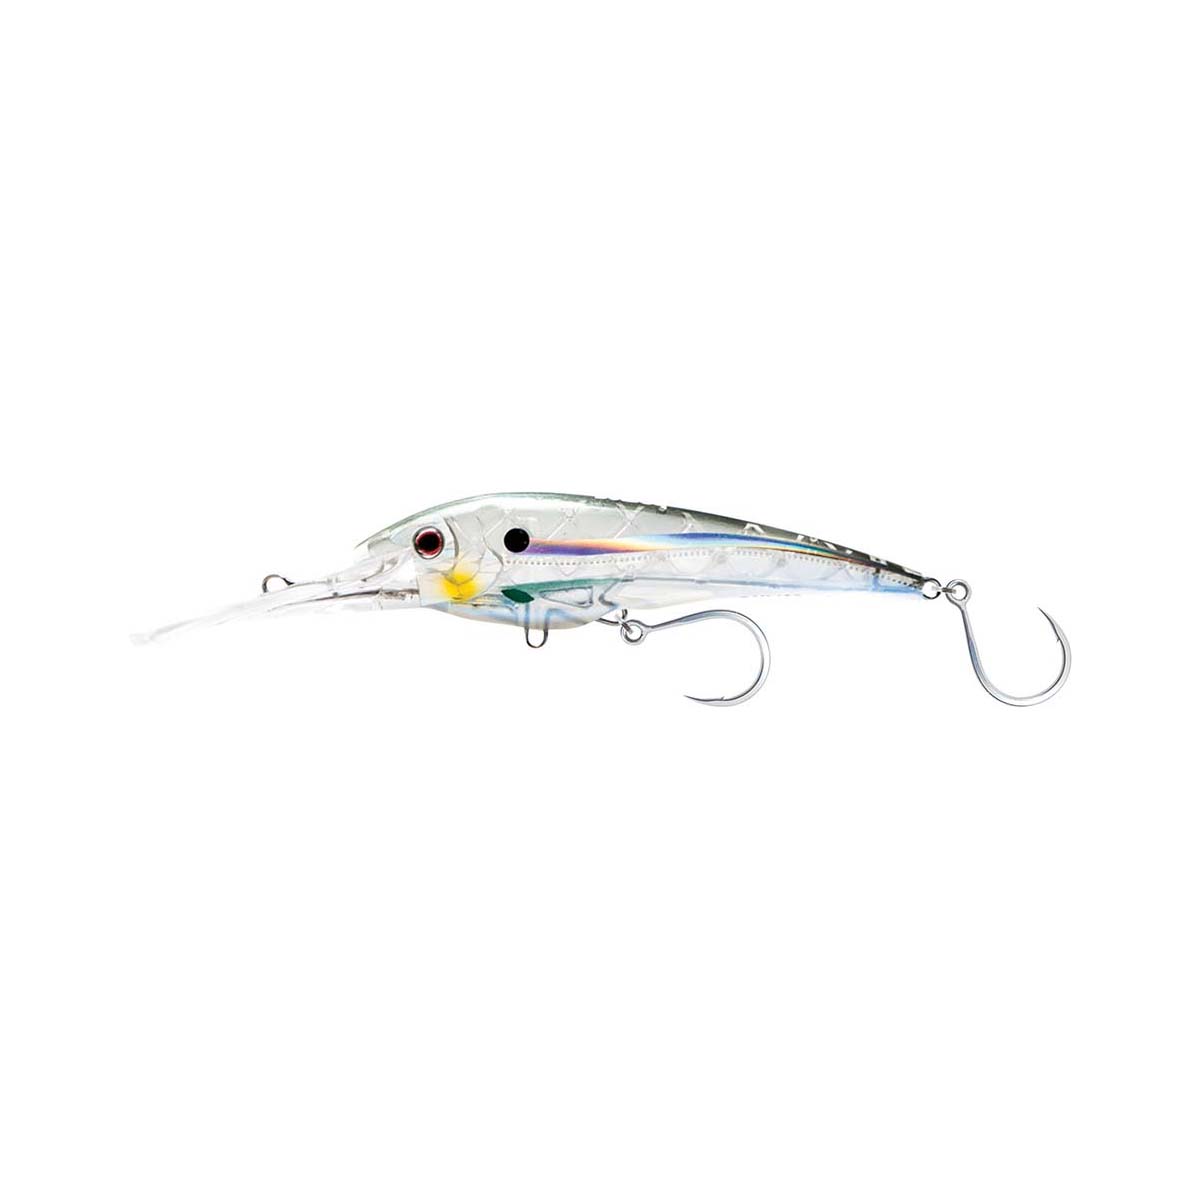 Nomad DTX Minnow Hard Body Lure 110mm Holo Ghost Shad @ Club BCF